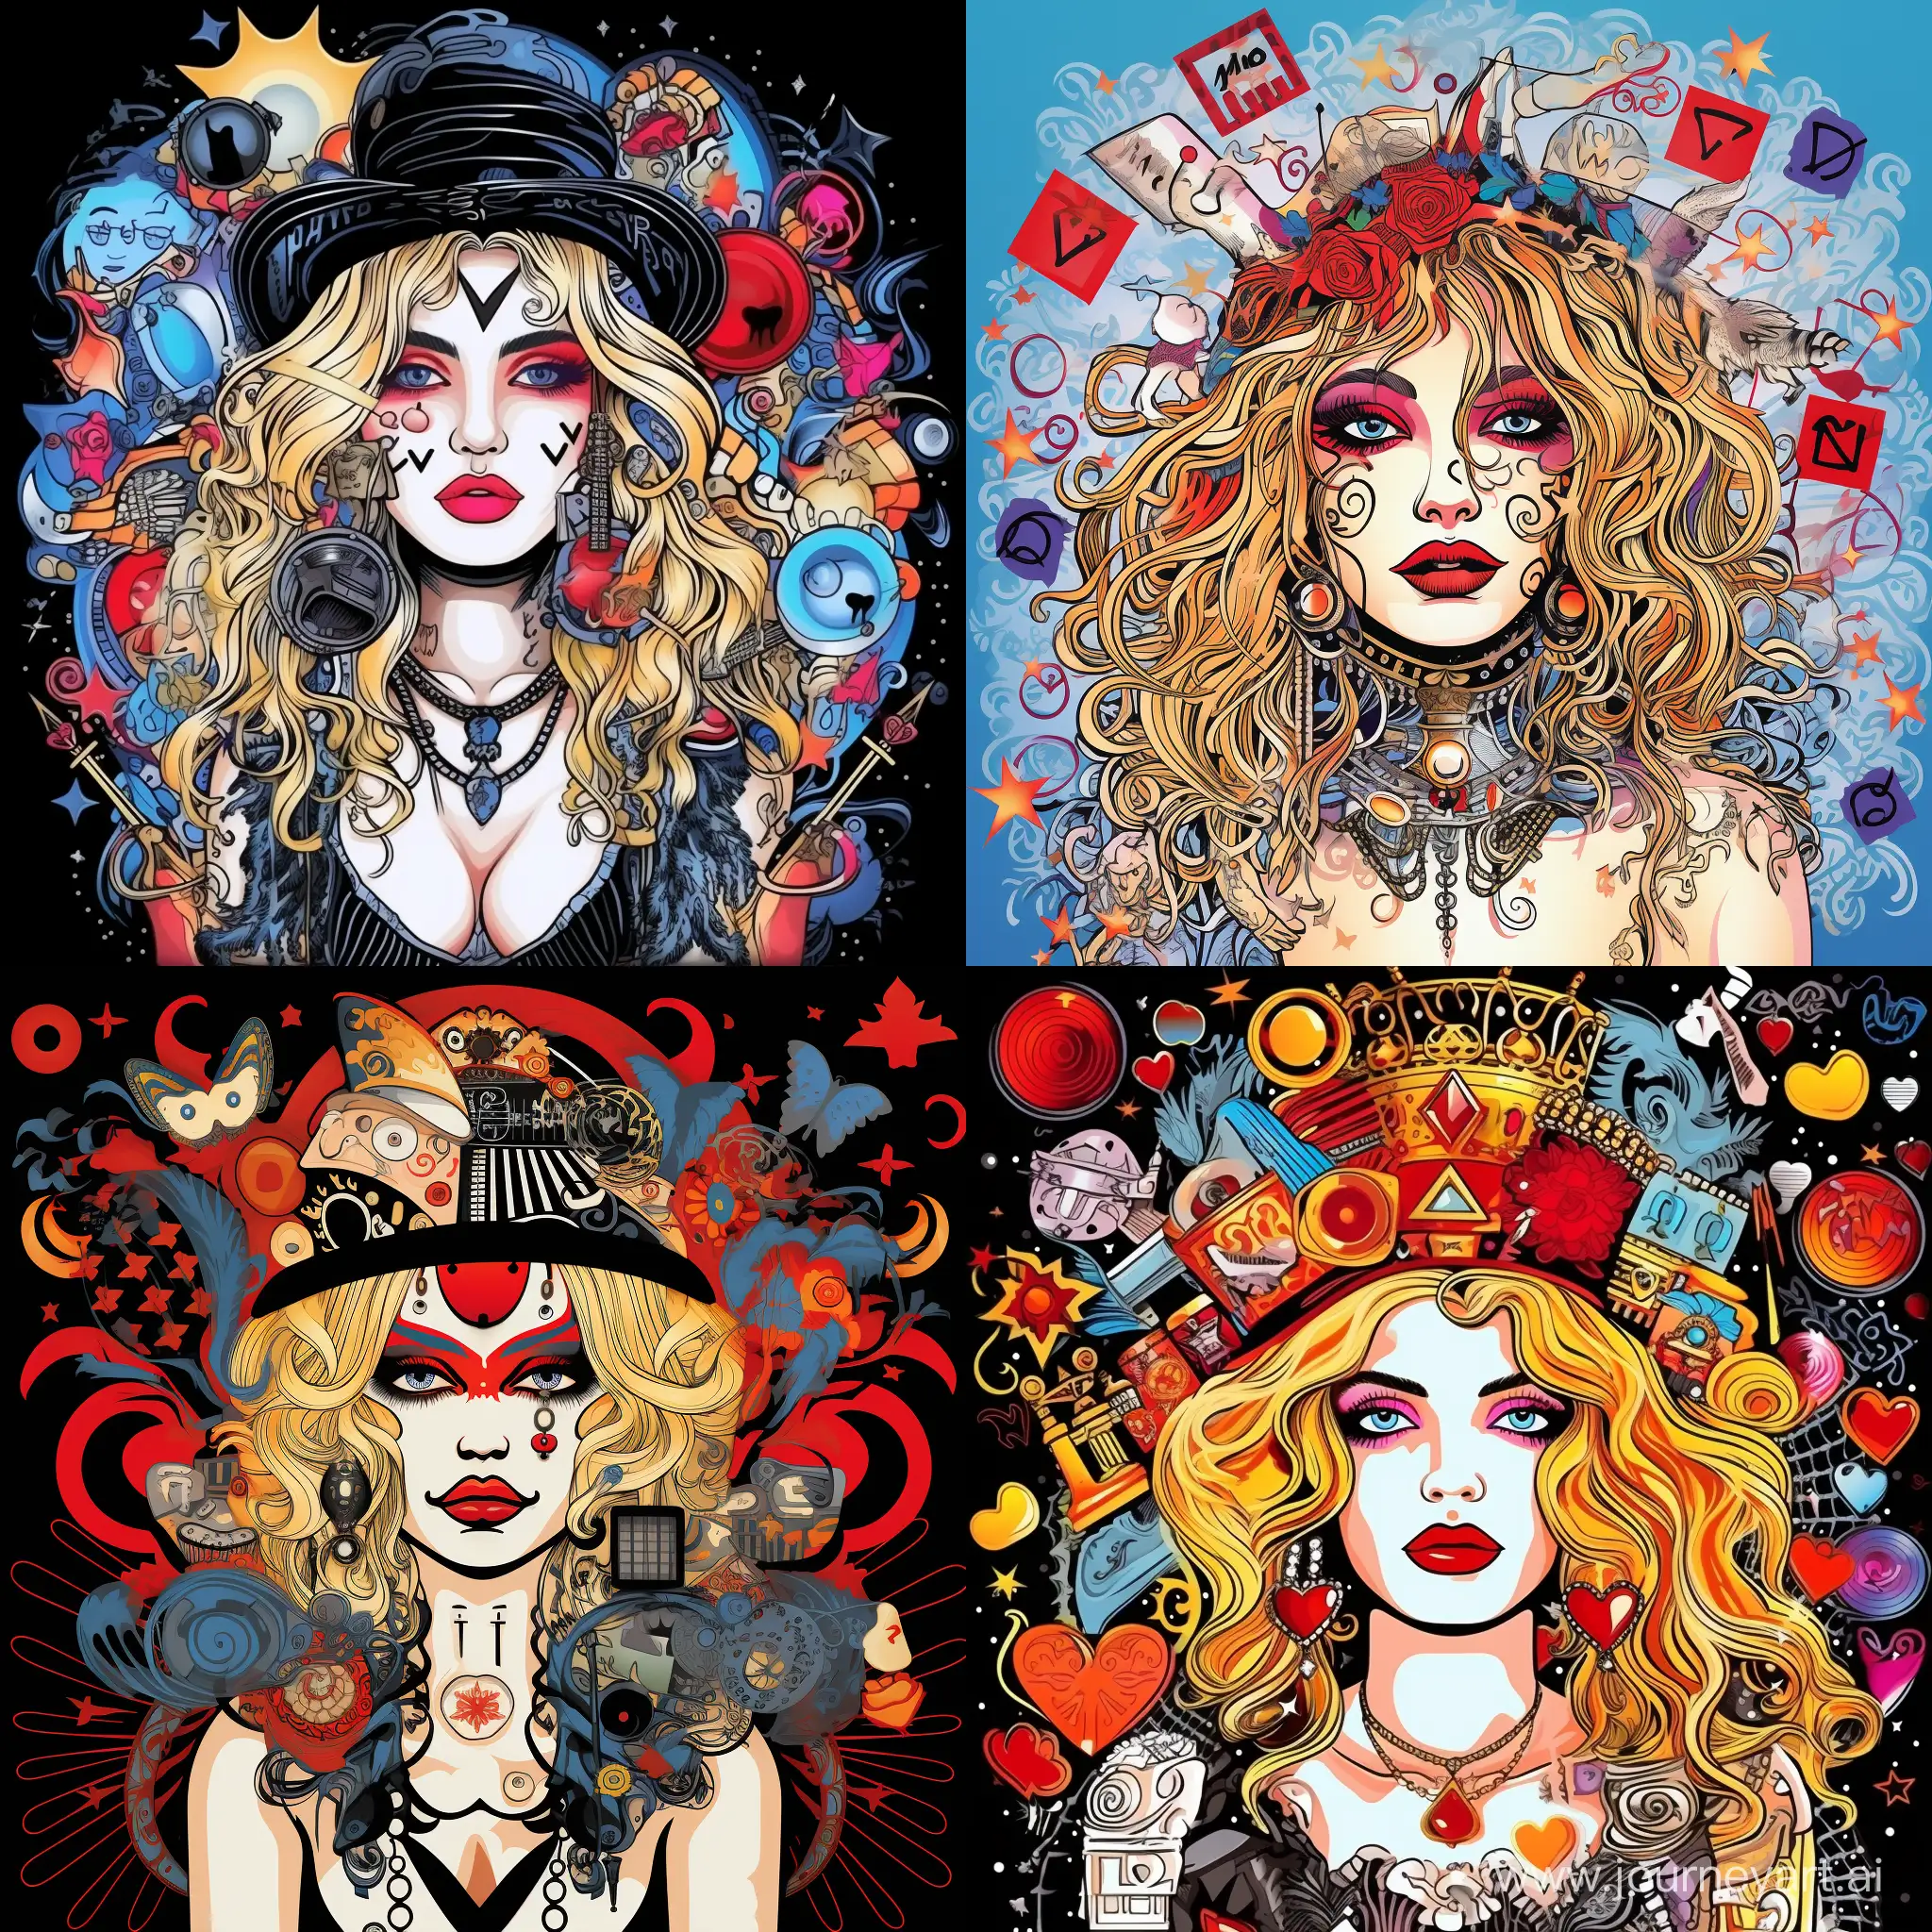 Waist portrait of the singer Madonna, beautiful blonde, with a crown on her head, surrounded by musical symbols, many details, complex colors, caricature, pop art style